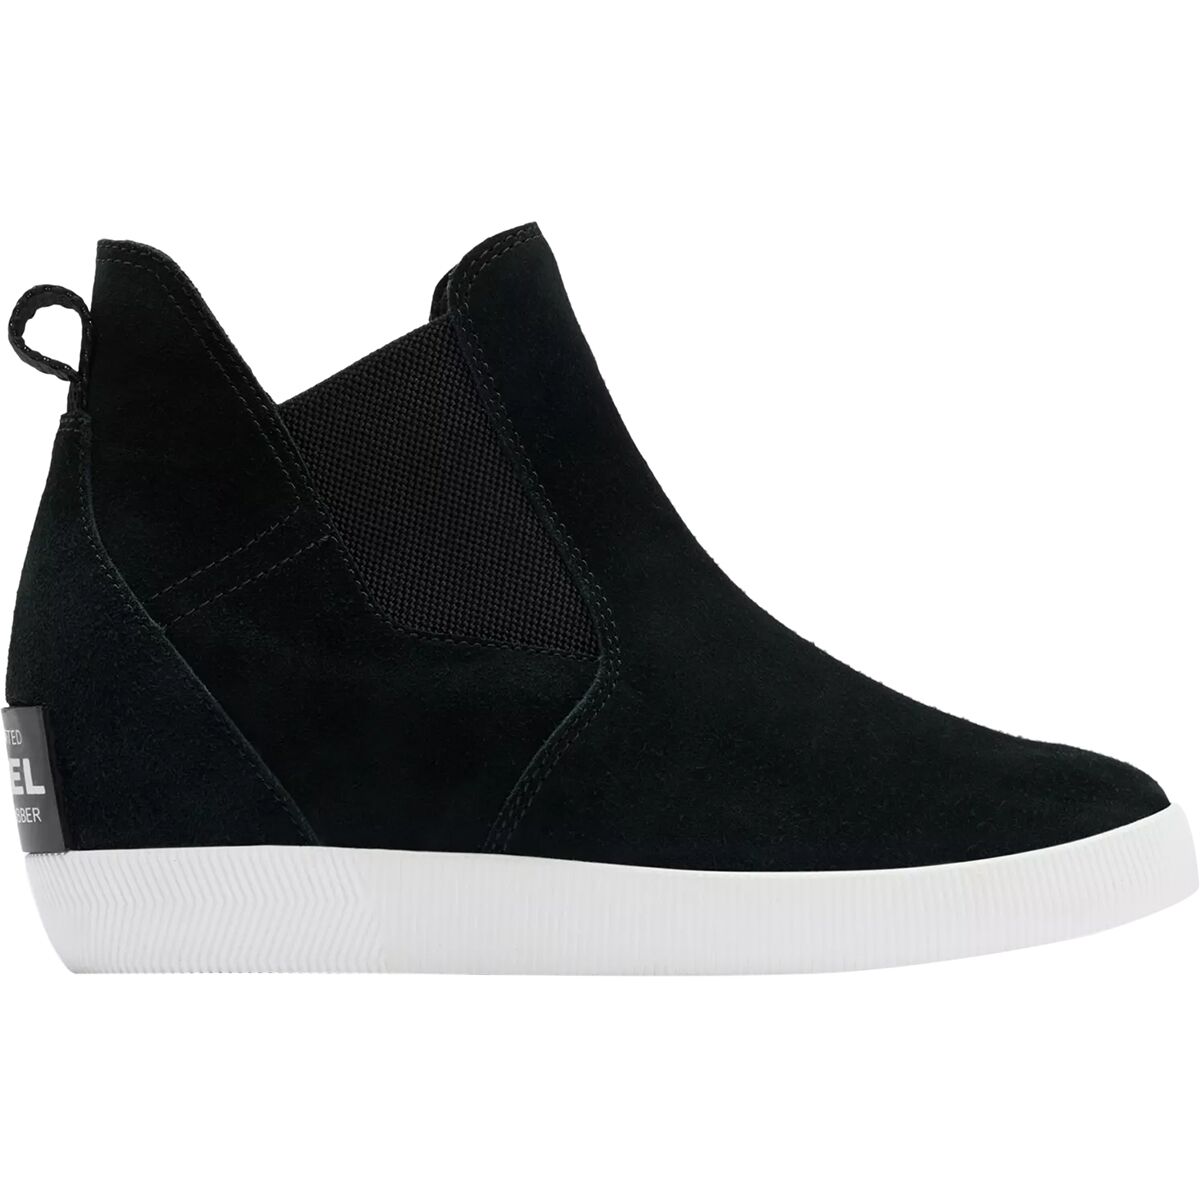 Out N About Slip-On Wedge II Boot - Women